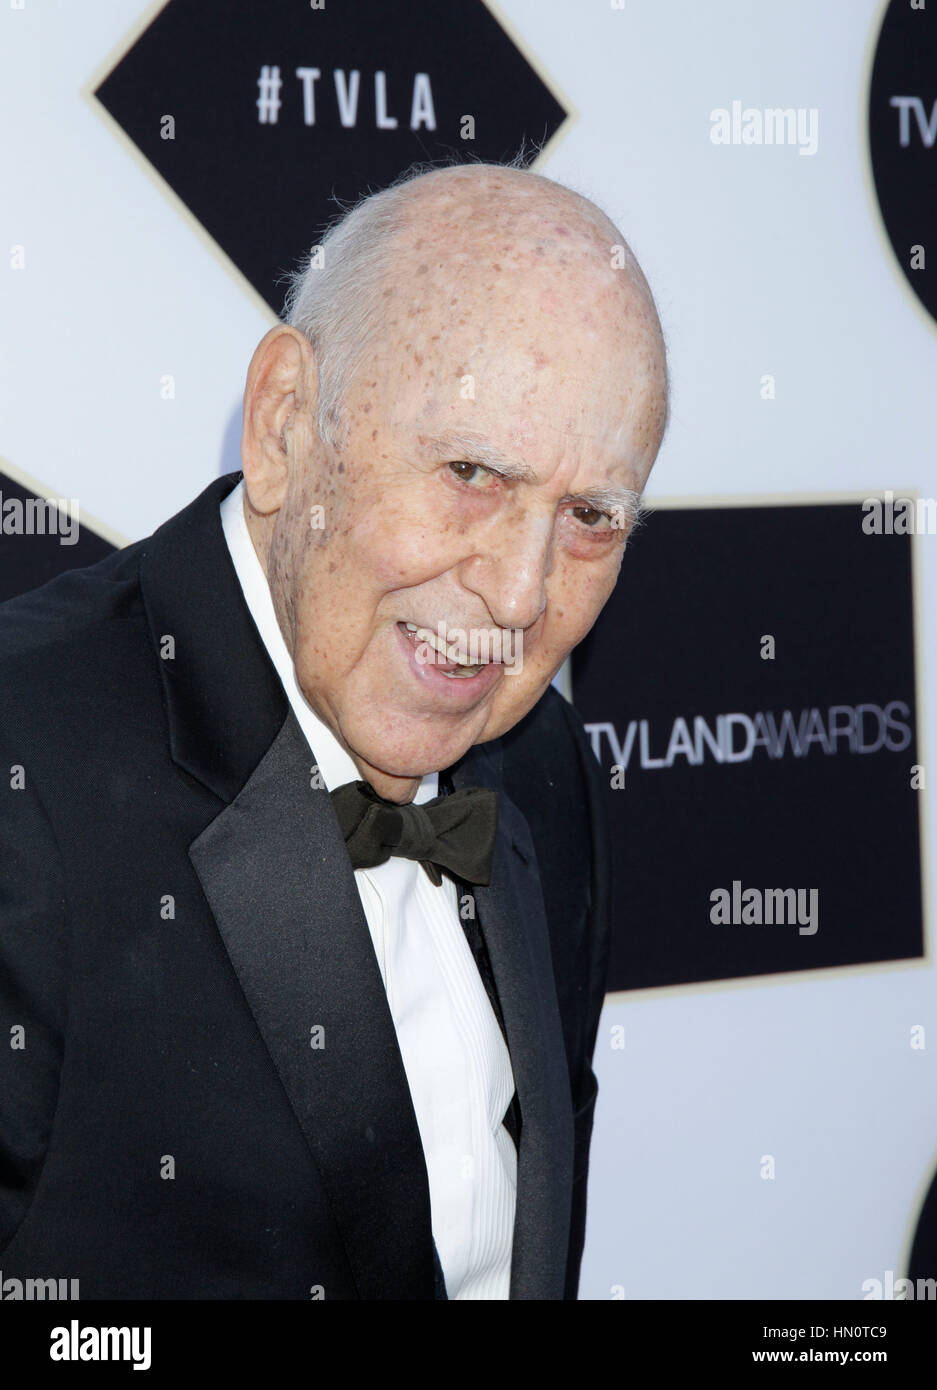 Carl Reiner arrives at the TV Land Awards on April 11, 2015 in Beverly Hills, California. Photo by Francis Specker Stock Photo